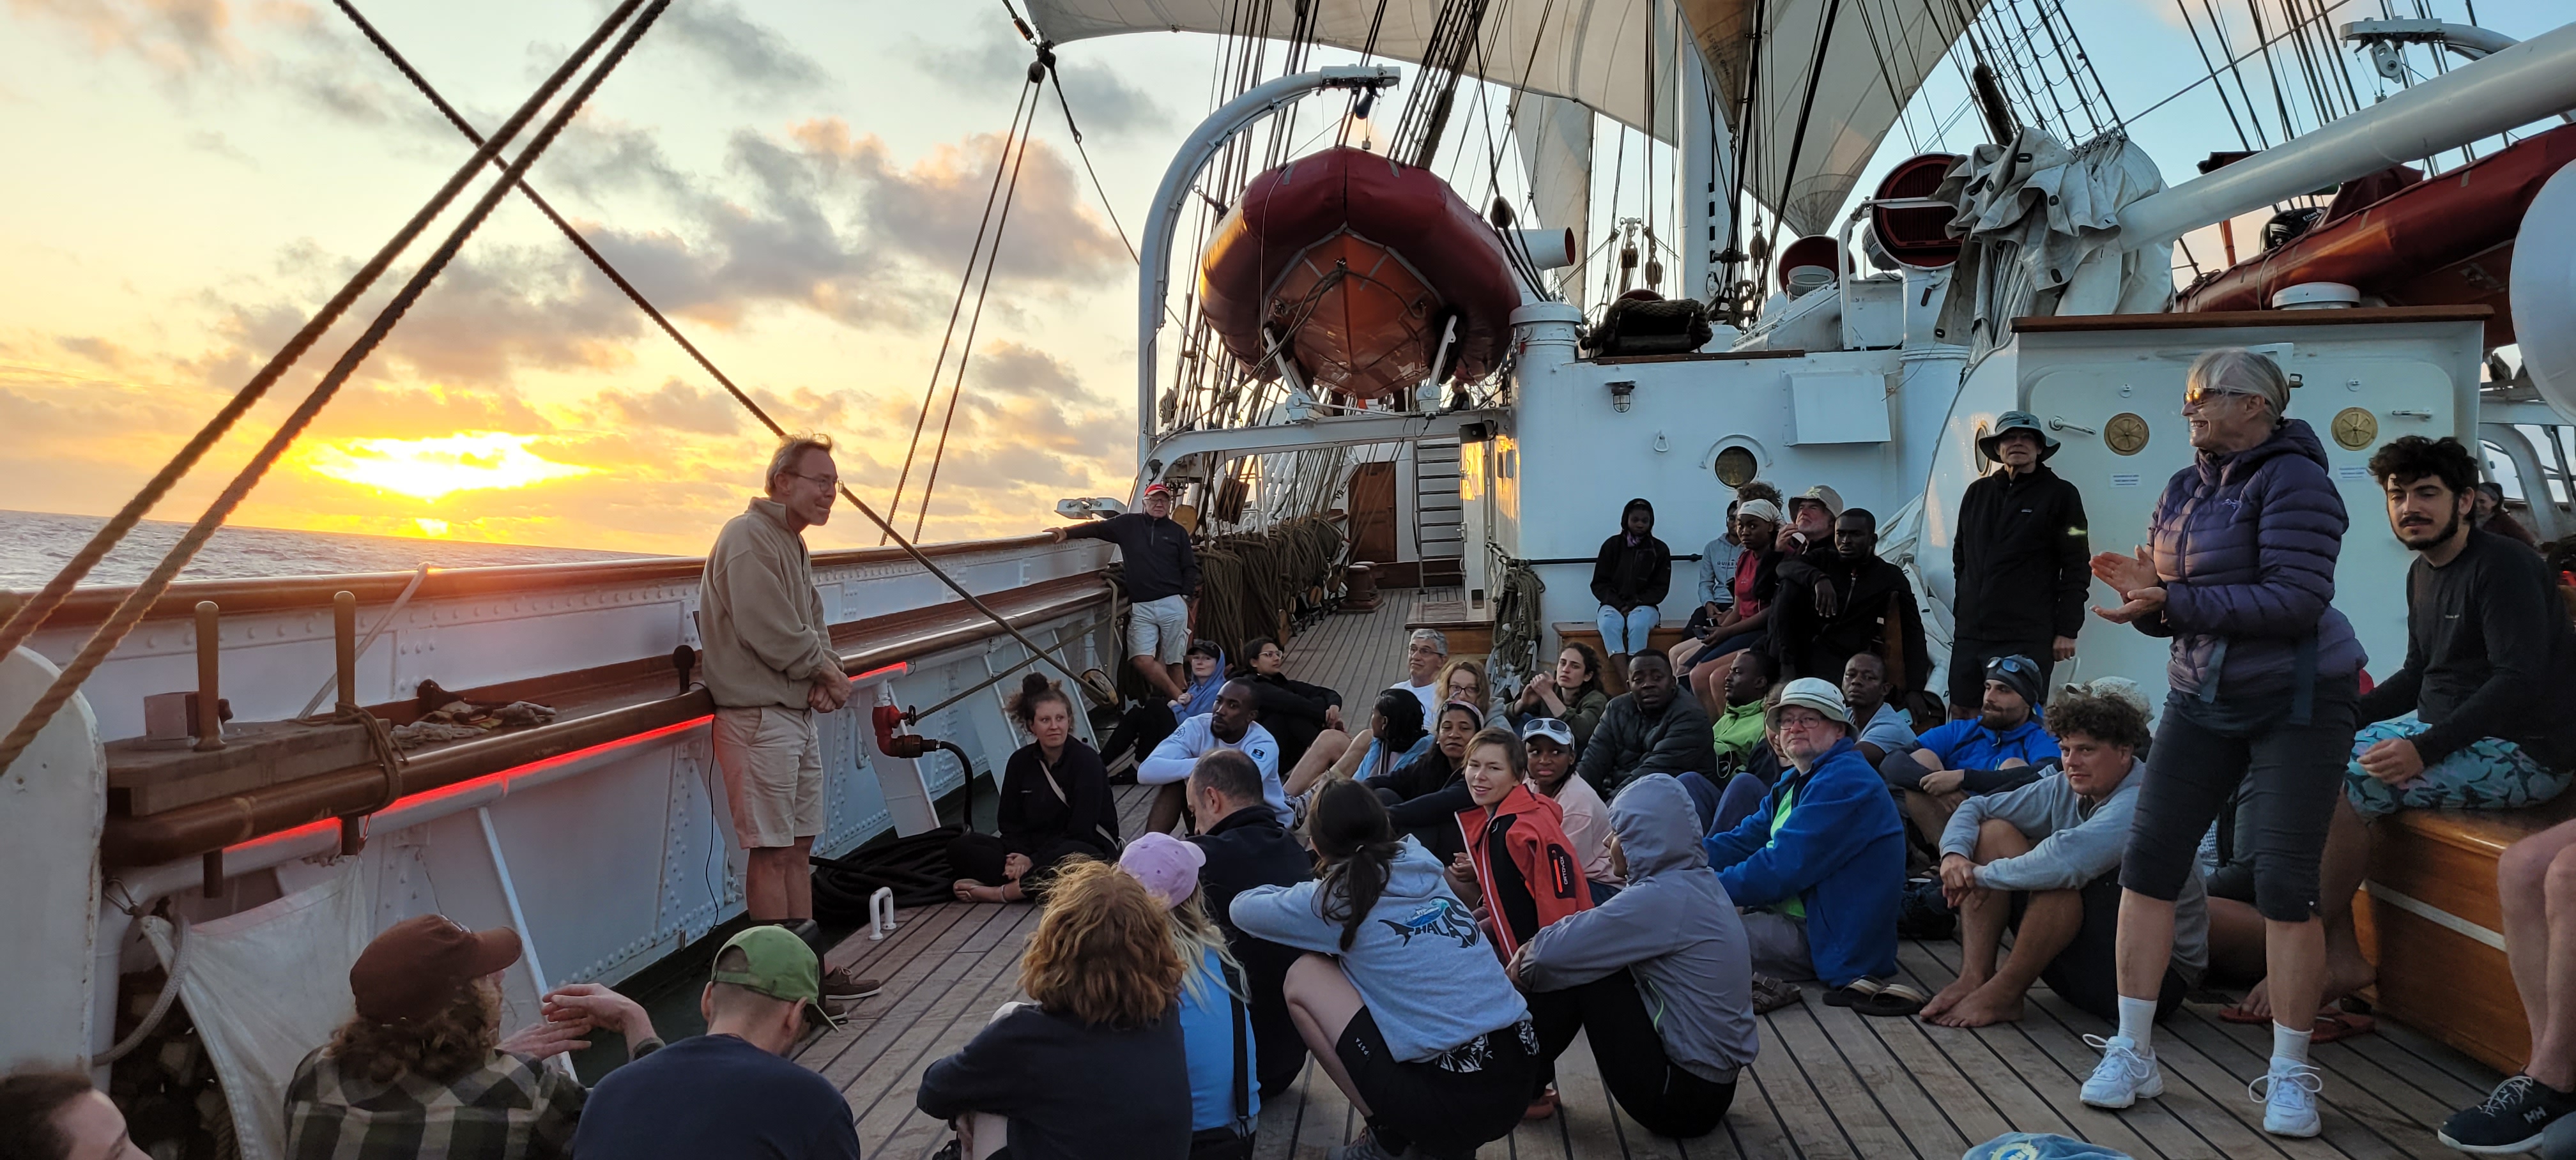 Lessons on board the Statsraad Lehmkuhl. Photo by Charles Lucas Makio